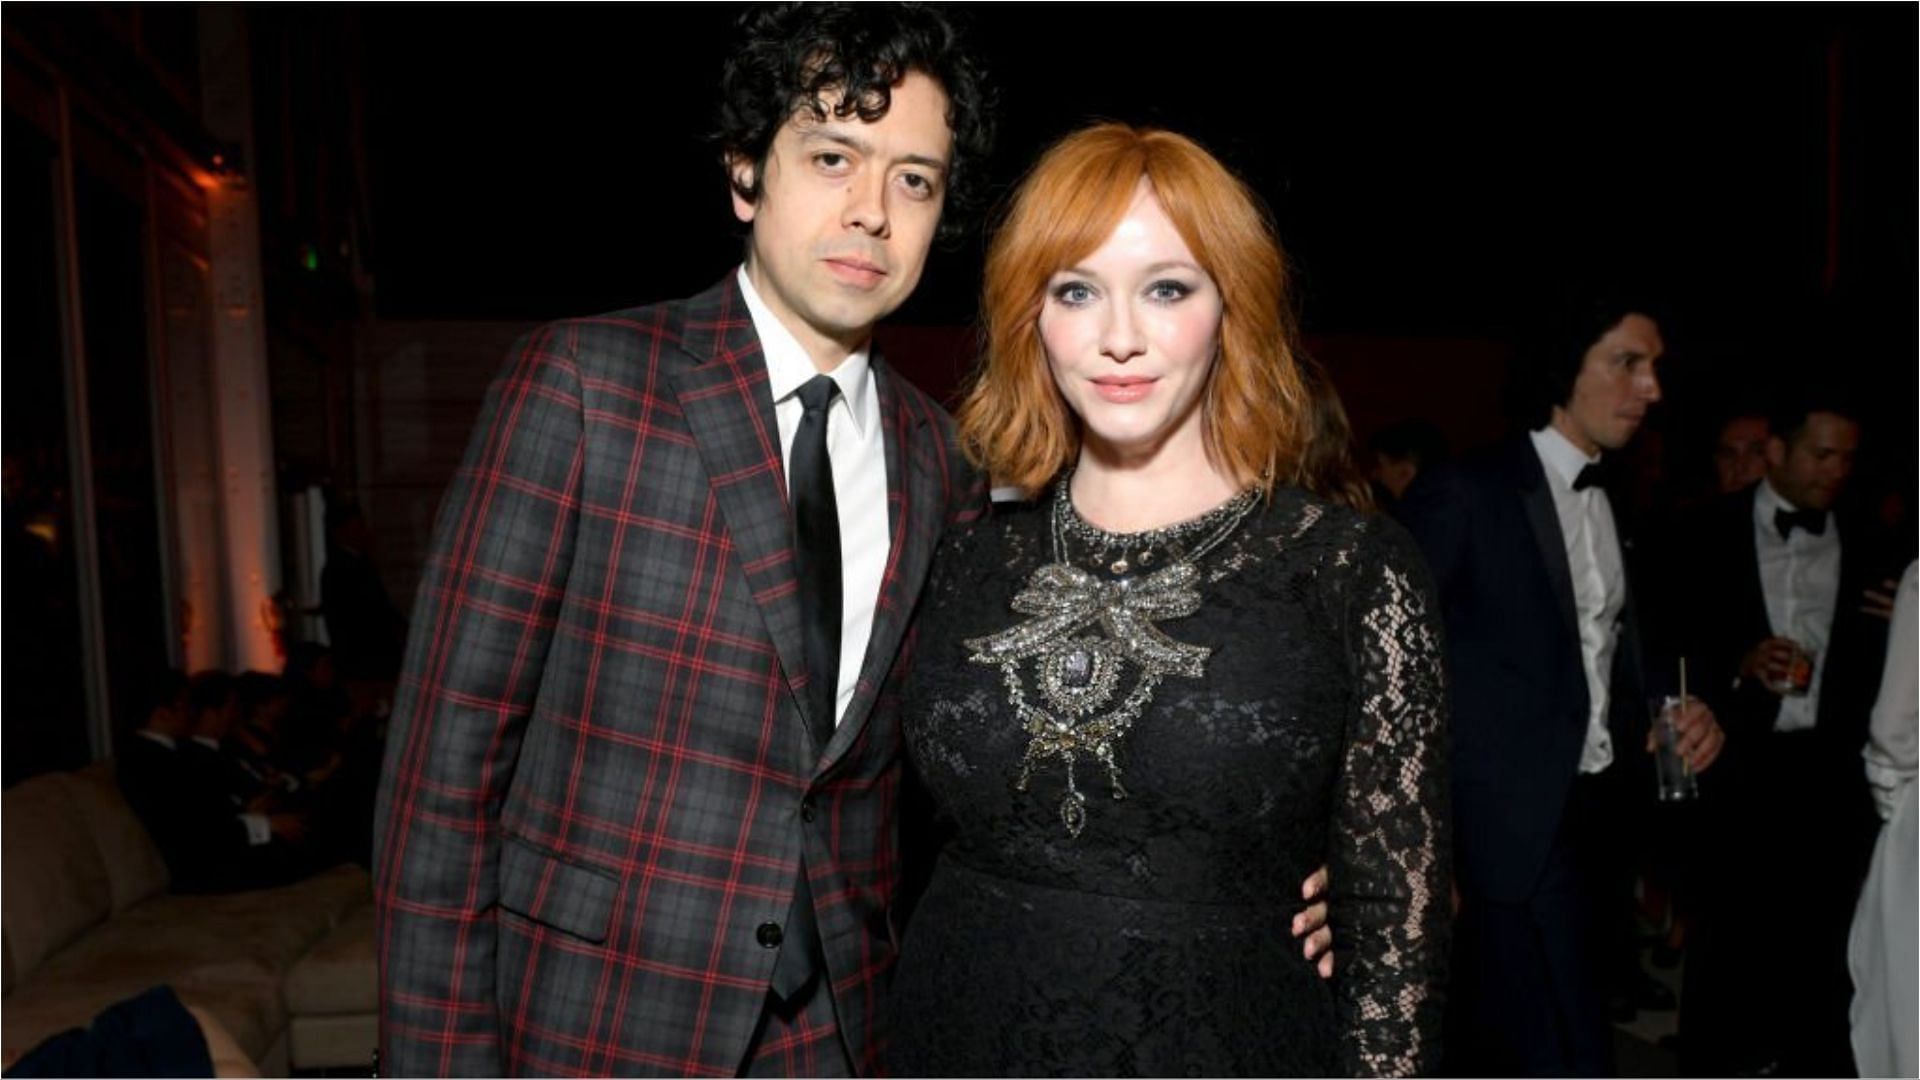 Christina Hendricks and Geoffrey Arend divorced in 2019 (Image via Emma McIntyre/Getty Images)